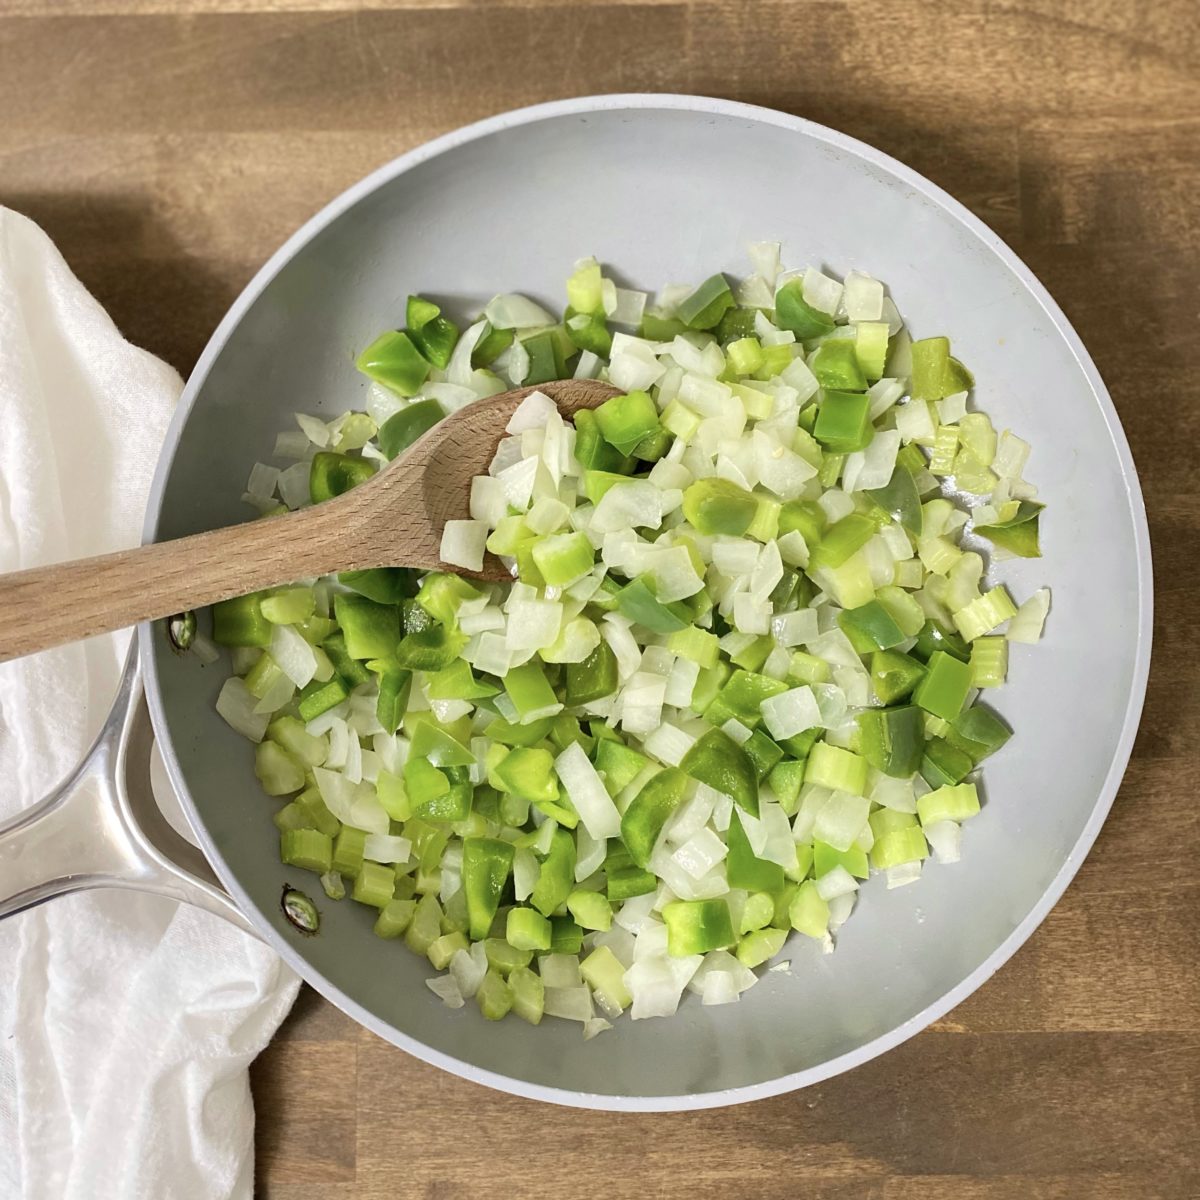 Celery, onion, and green pepper in a sautee pan with a wooden spoon.